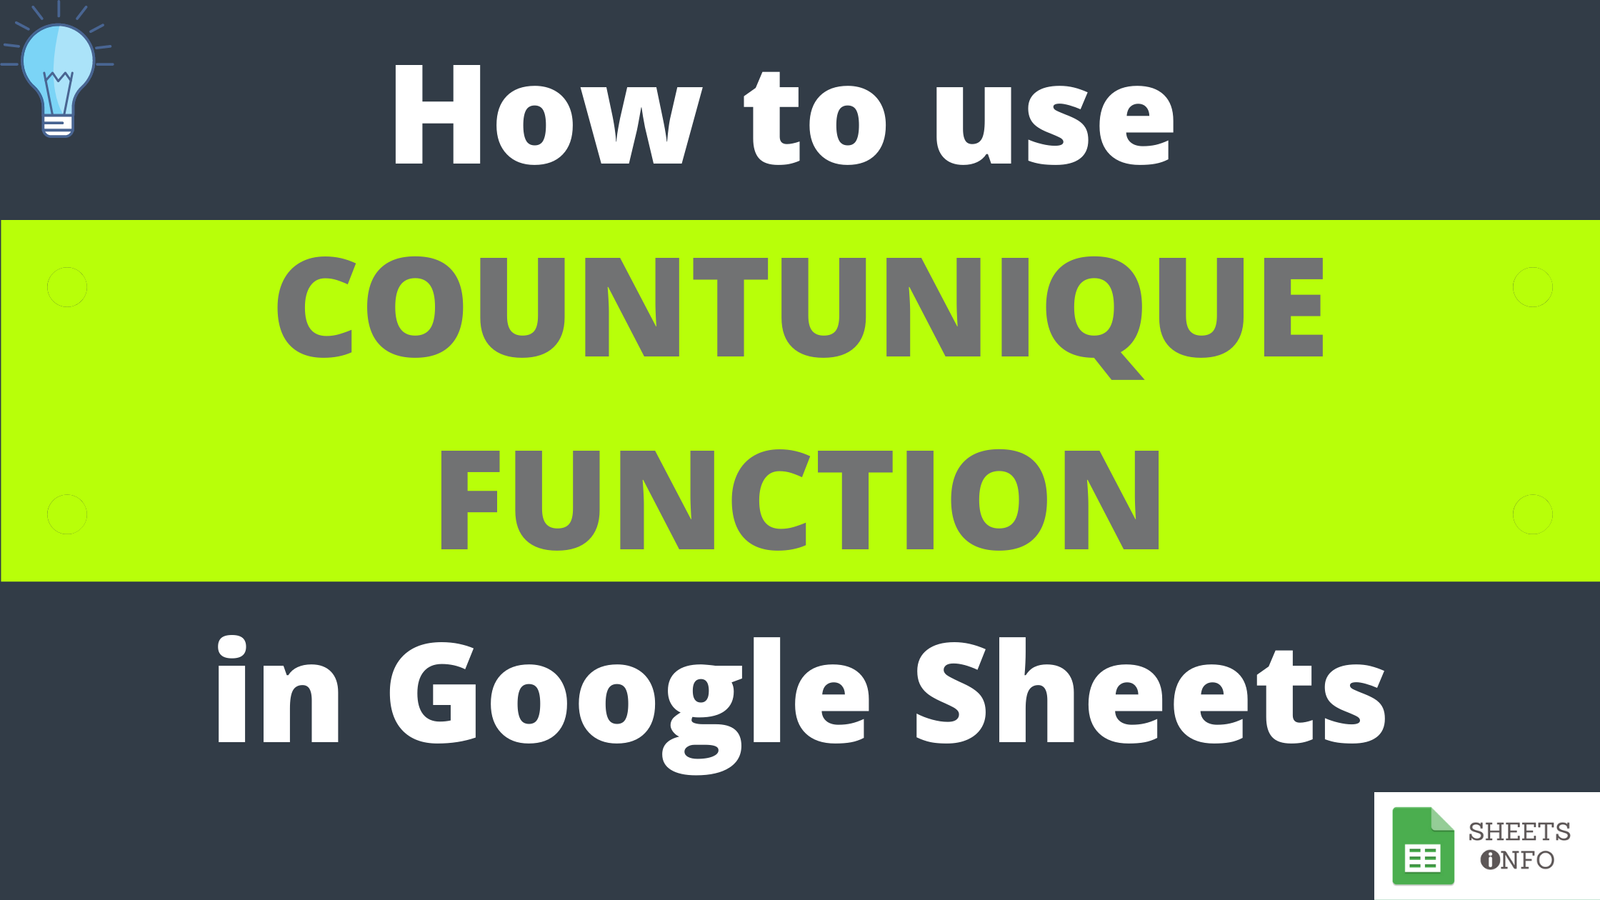 COUNTUNIQUE Function in Google Sheets